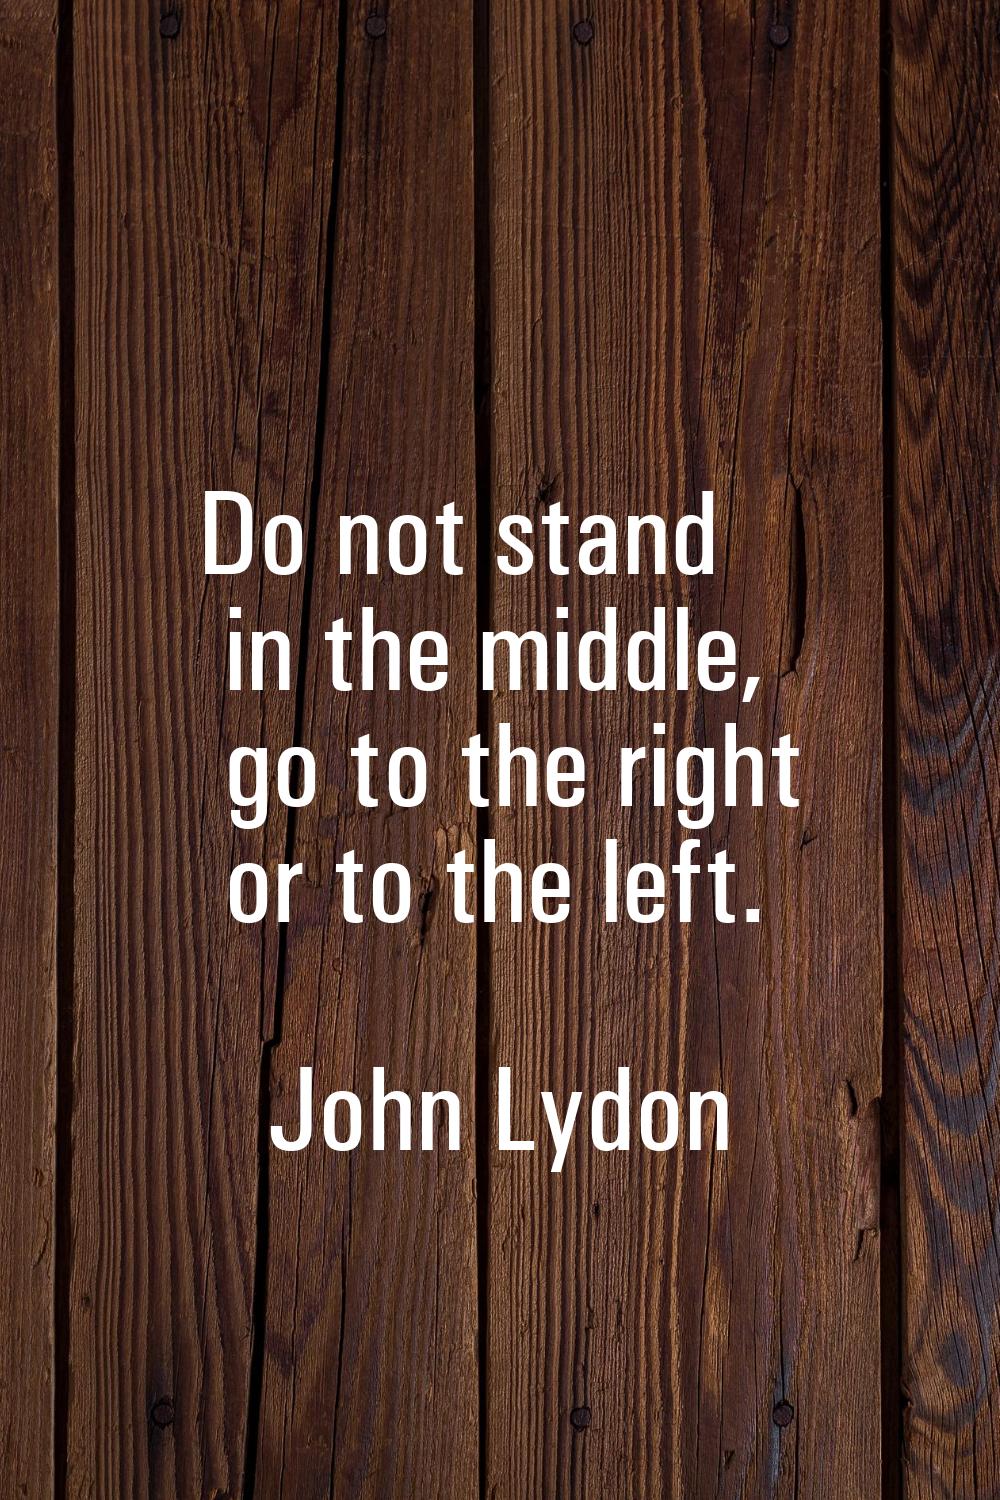 Do not stand in the middle, go to the right or to the left.